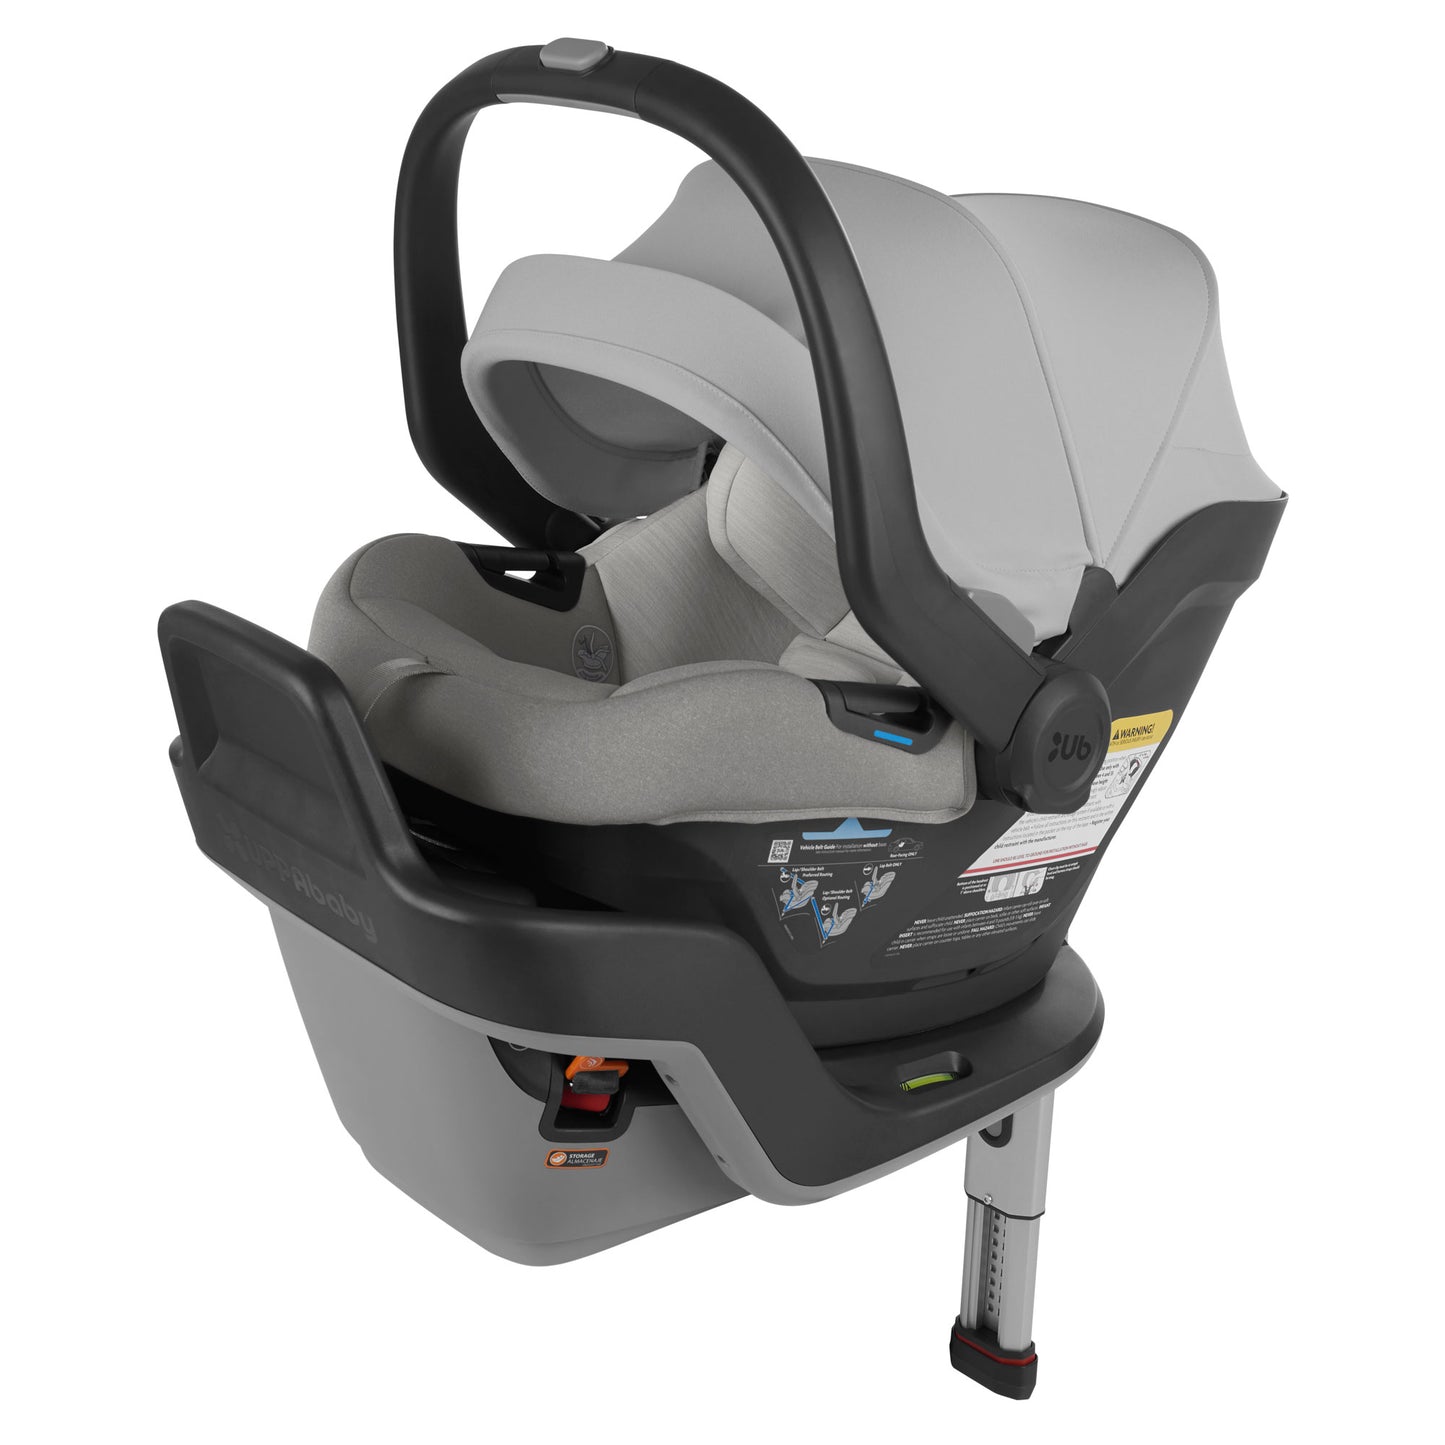 UPPAbaby MESA MAX Infant Car Seat - Anthony